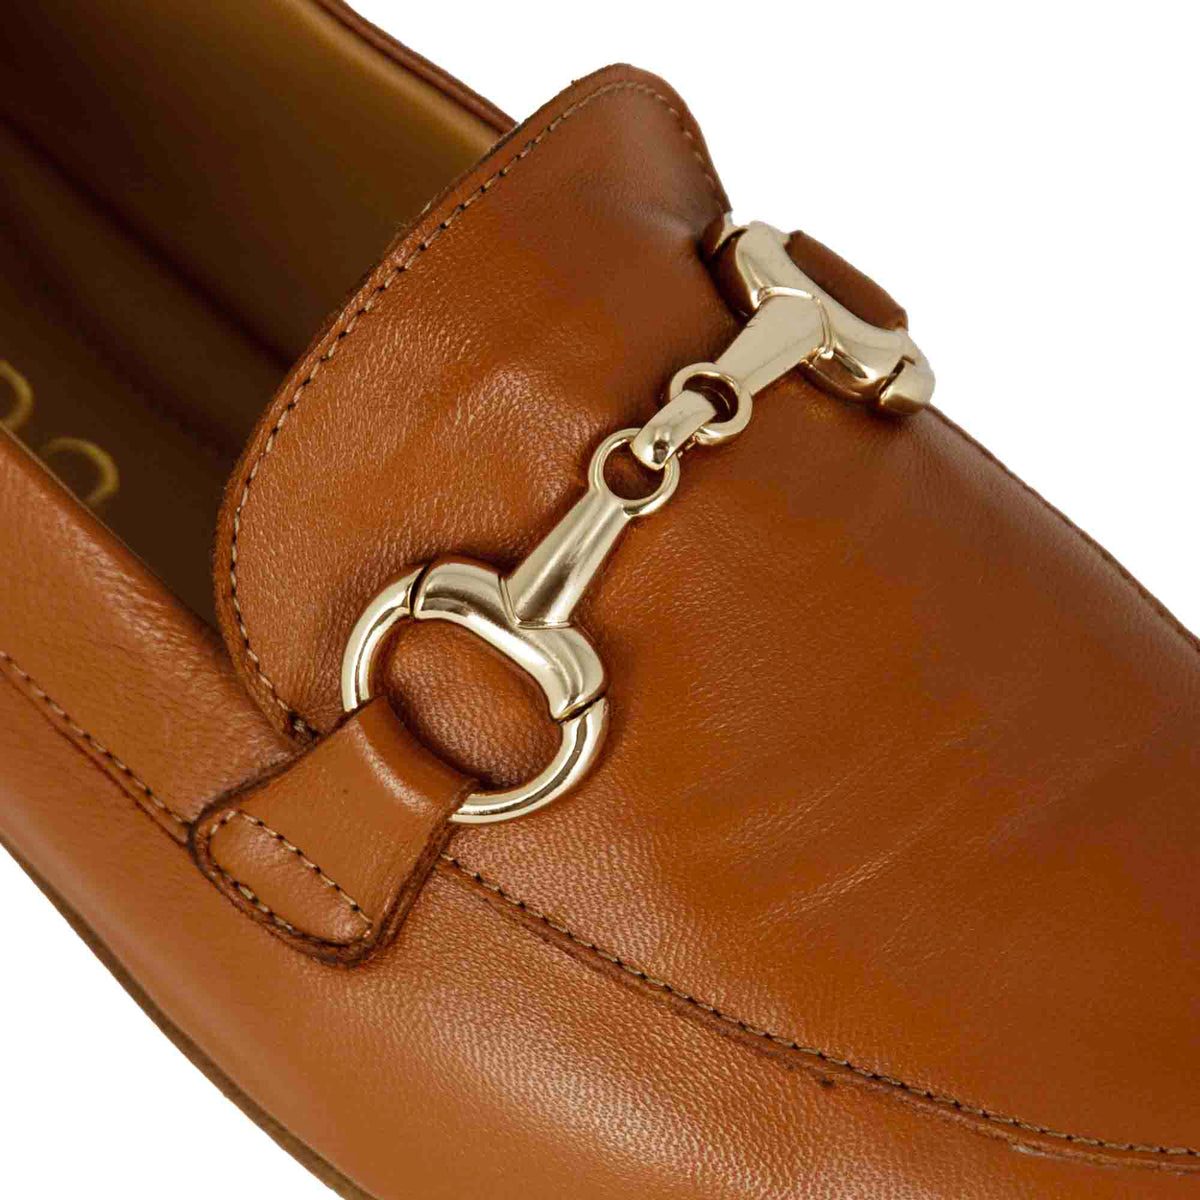 Classic women's moccasin with horsebit in brown leather